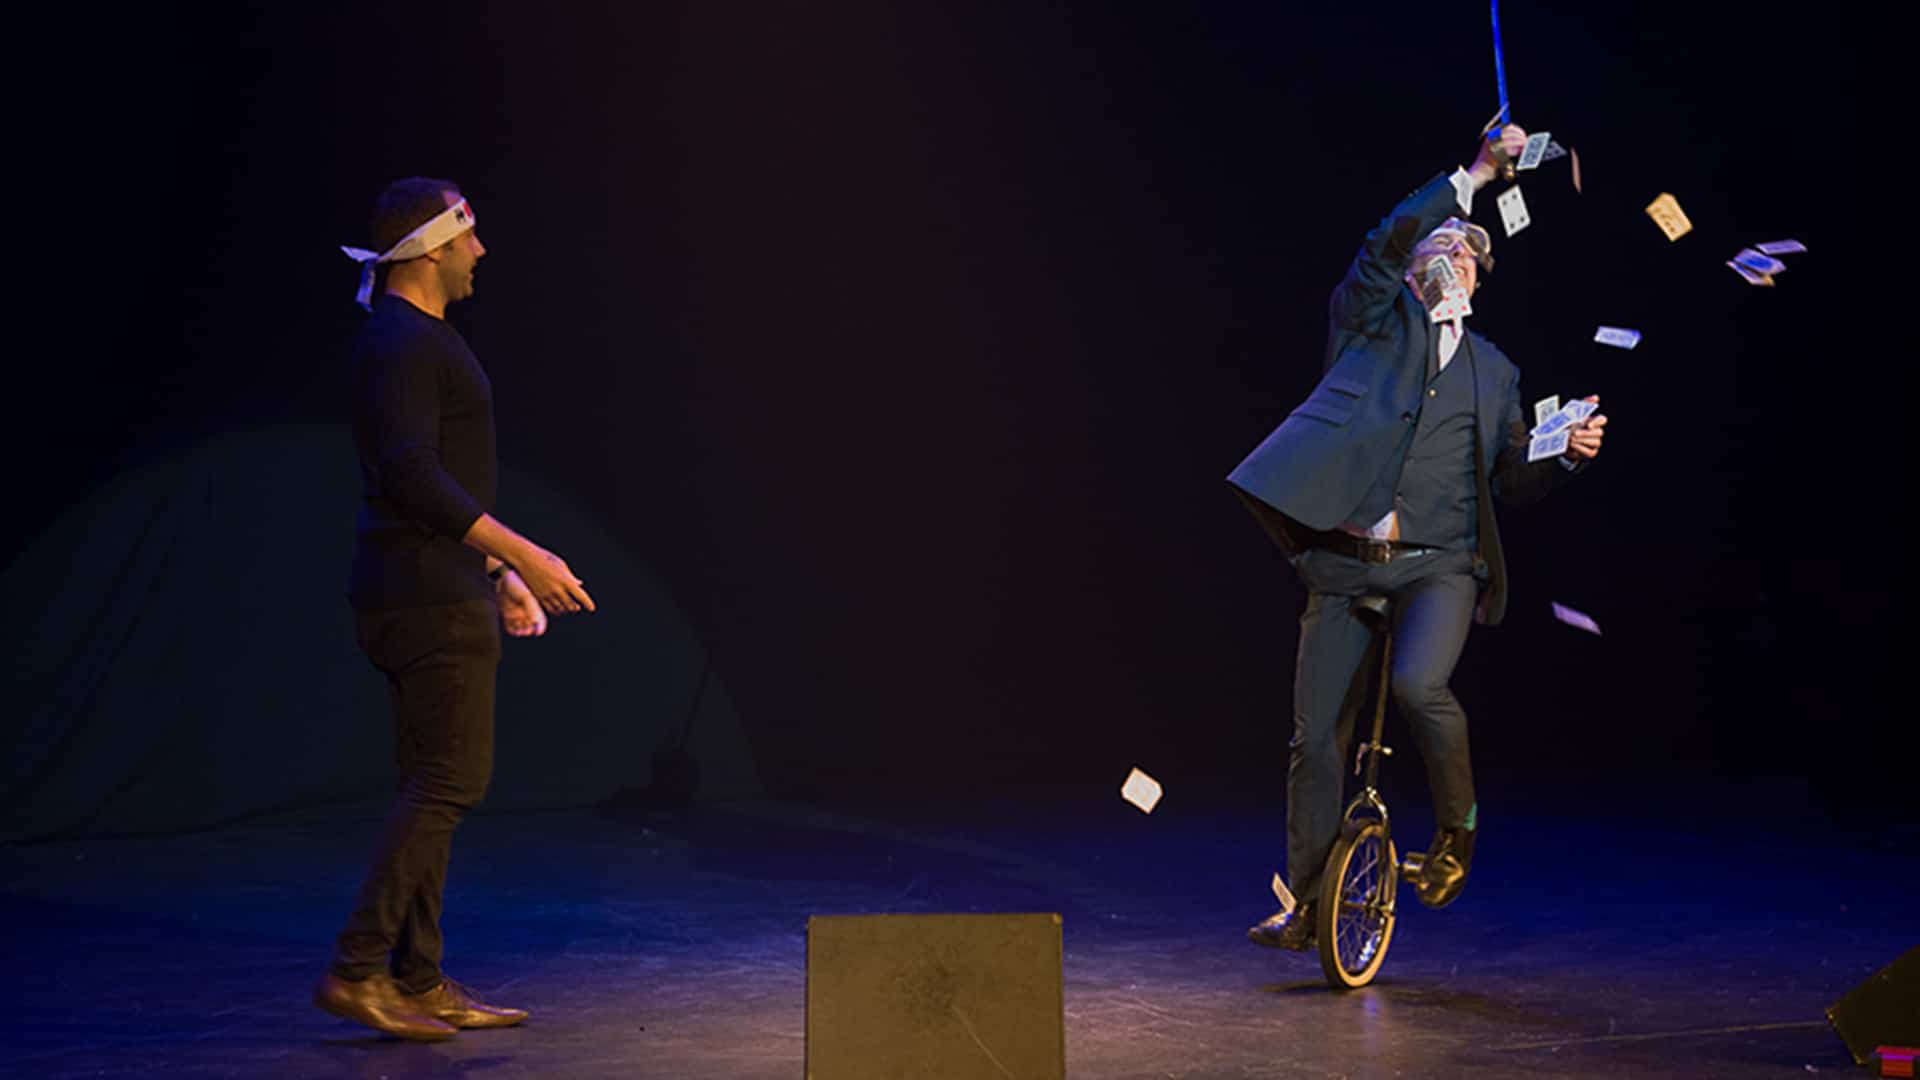 Christian Lee performing on stage, riding a unicycle, and dropping playing cards all around him. An audience member stands on stage next to him looking on